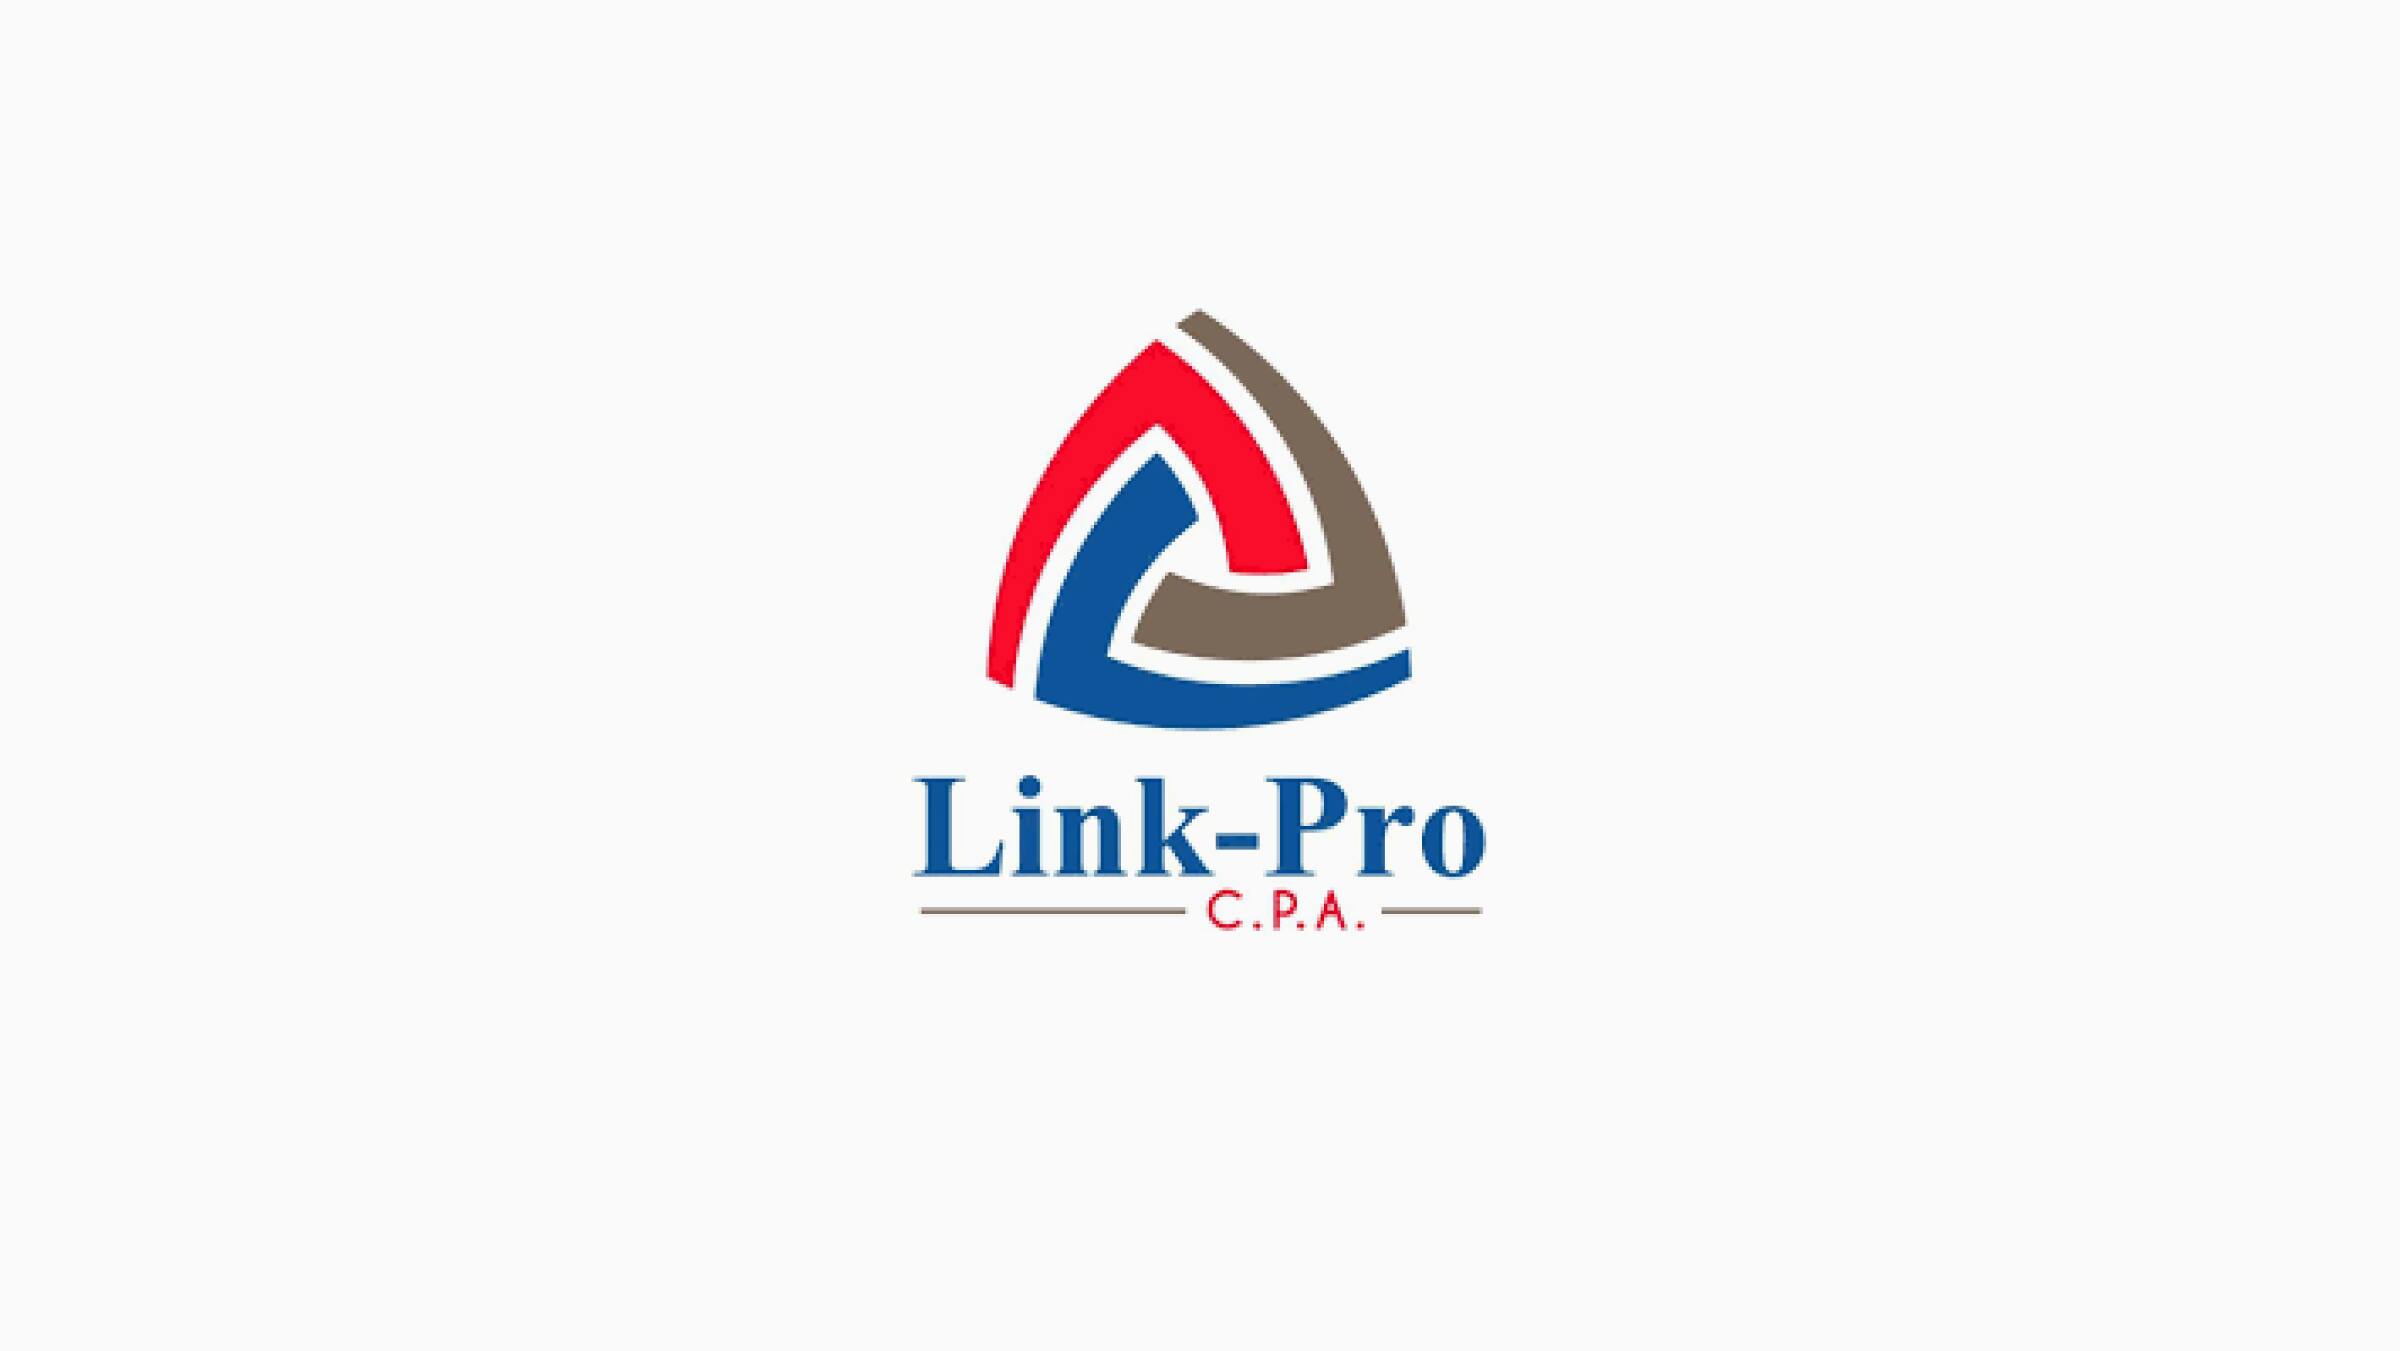 The Link-Pro CPA logo